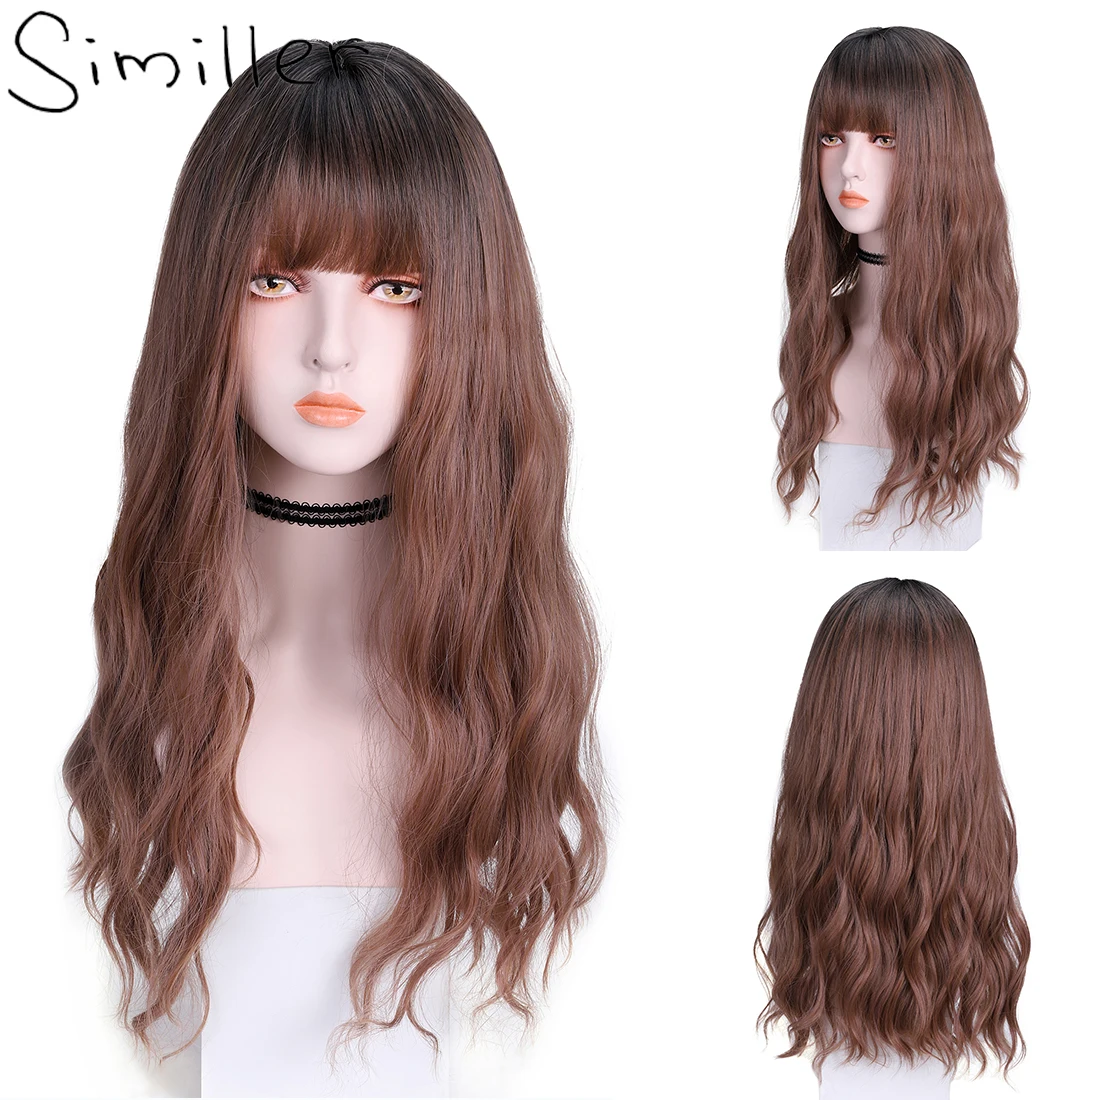 

Similler Long Curly Hair Ombre Synthetic Wigs For Women Heat Resistance Fiber Pure Black Brown Highlights Color Daily Use Wig